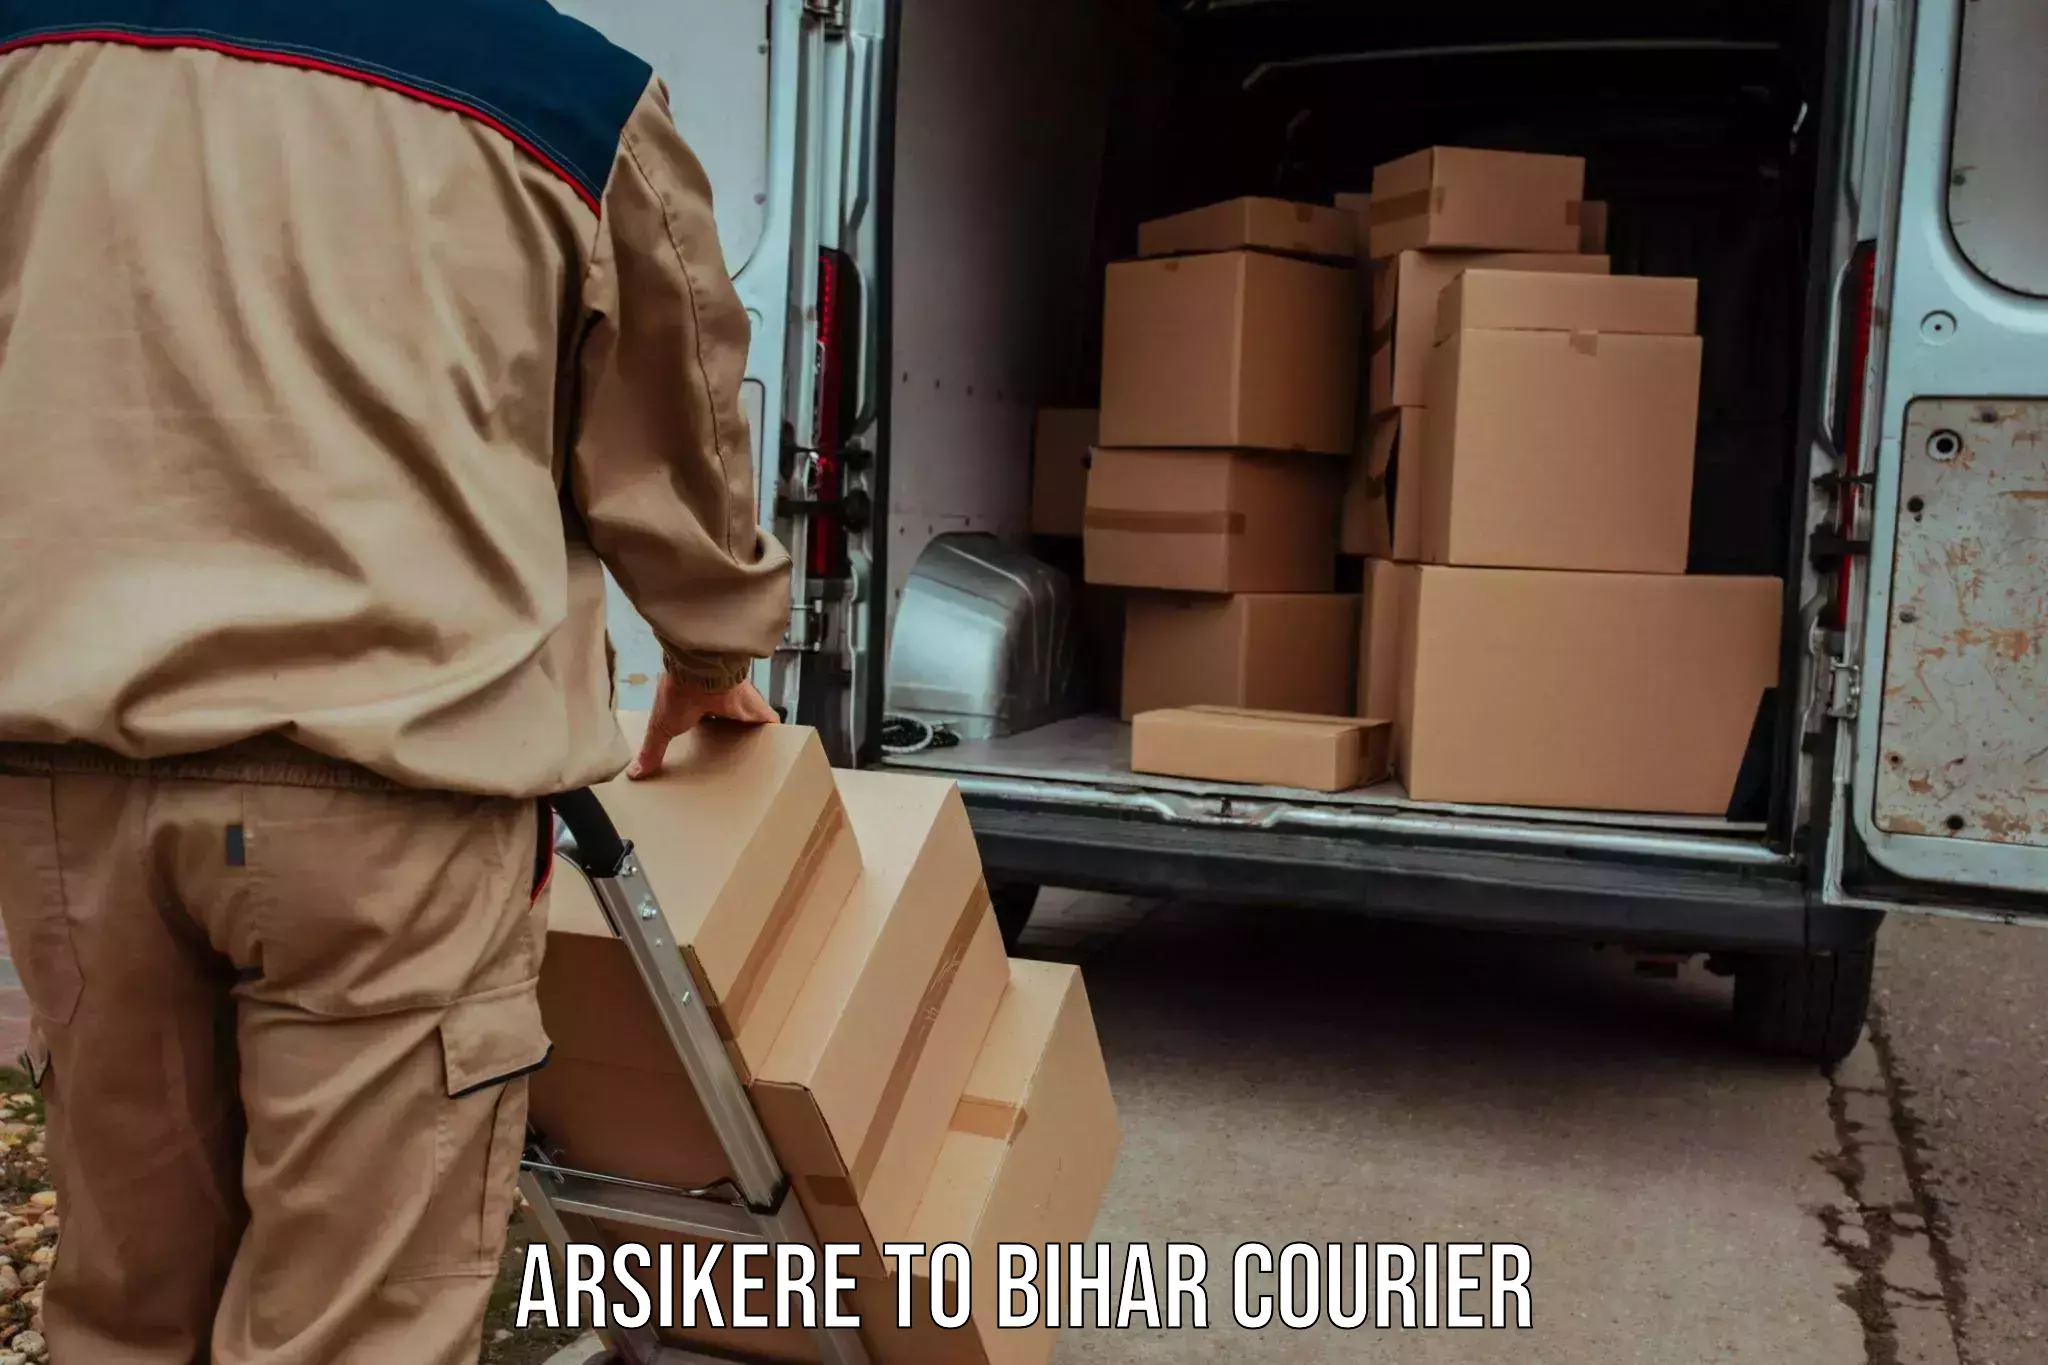 Next-day freight services Arsikere to Hajipur